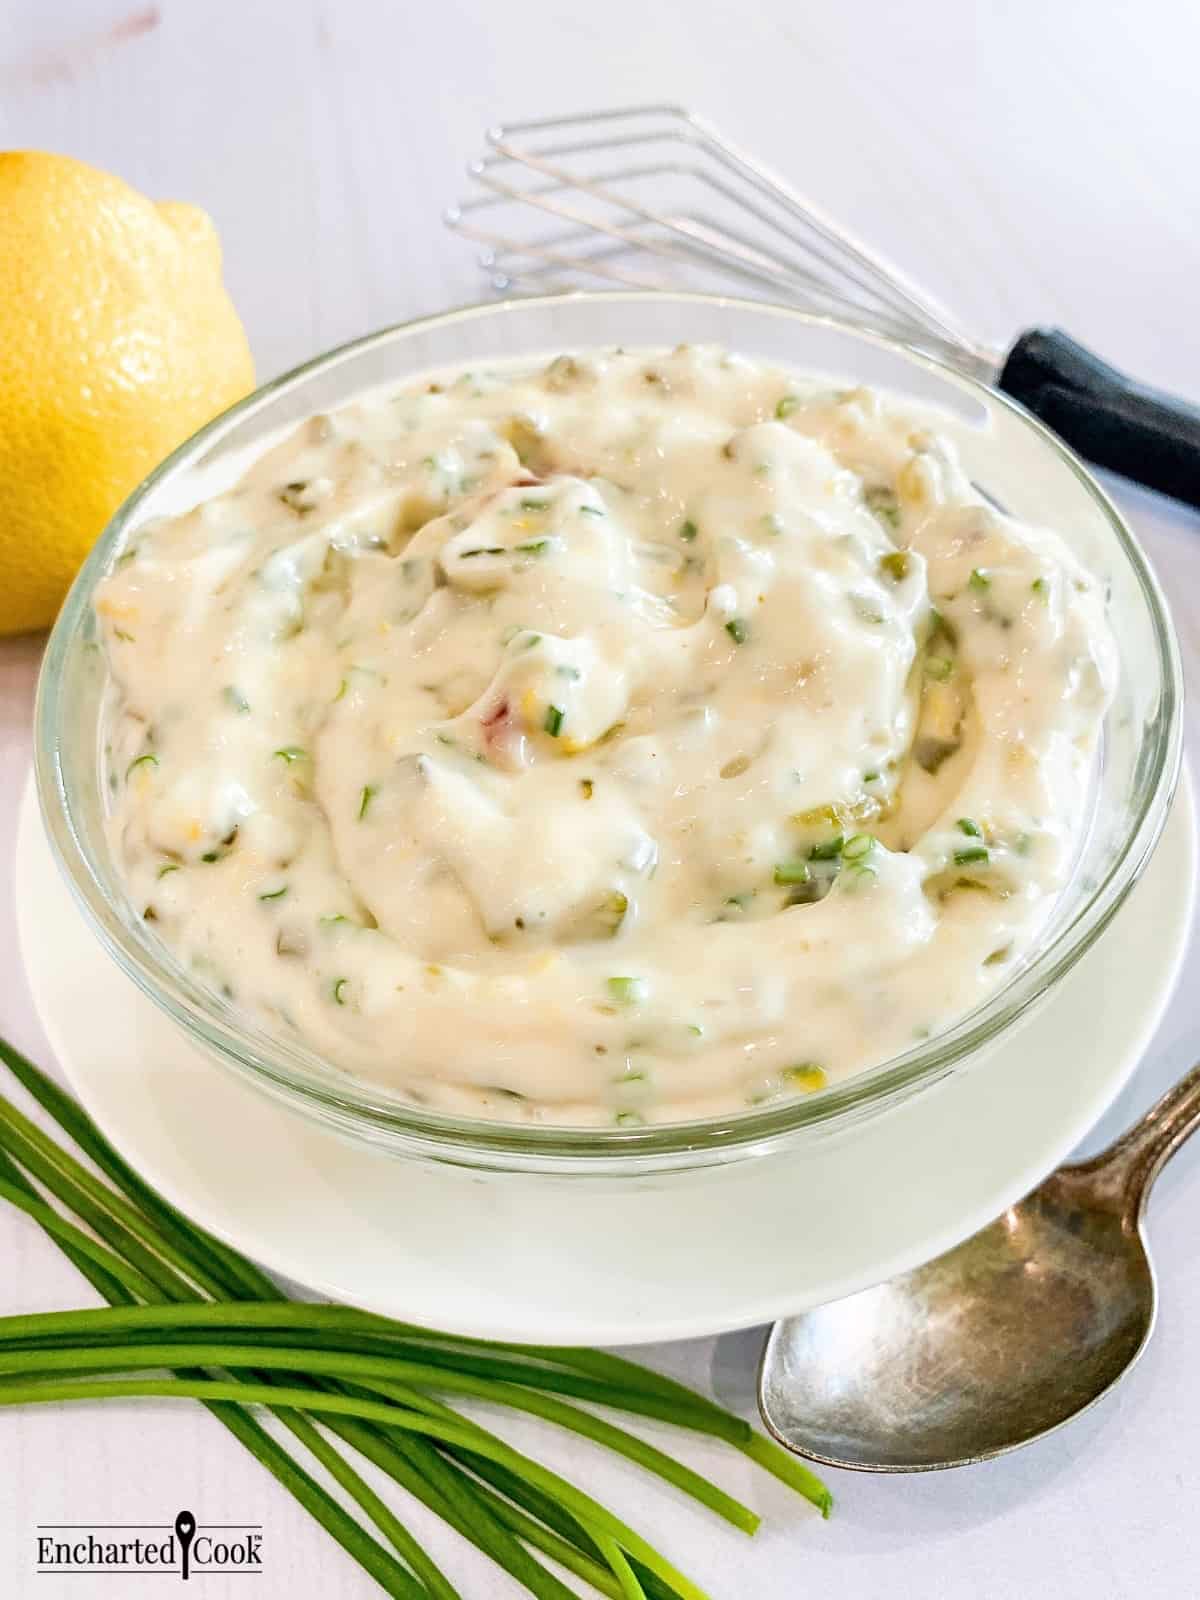 Tartar sauce in a clear glass bowl on a white plate encircled by a lemon, fresh whole chives, a small whisk, and a spoon.